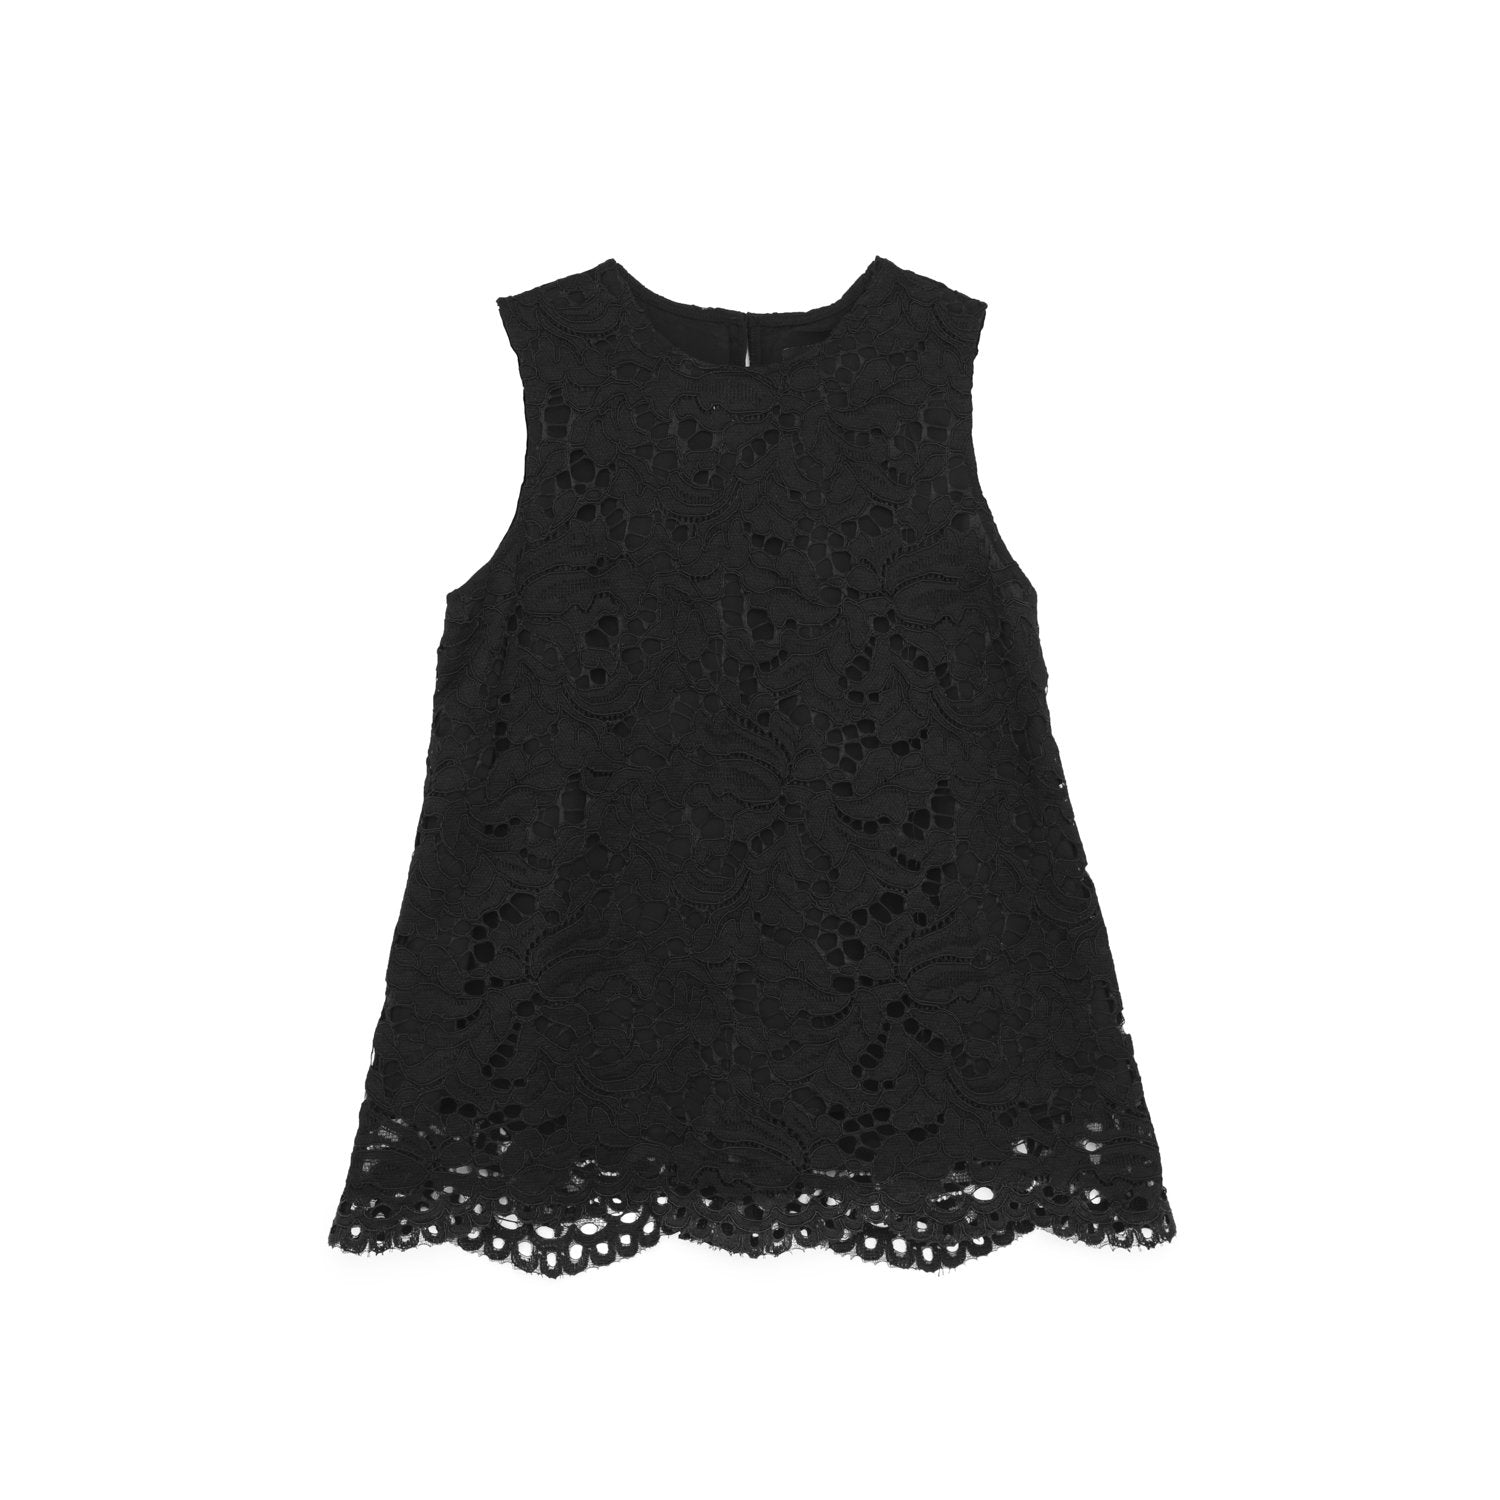 Lace Top in Black.